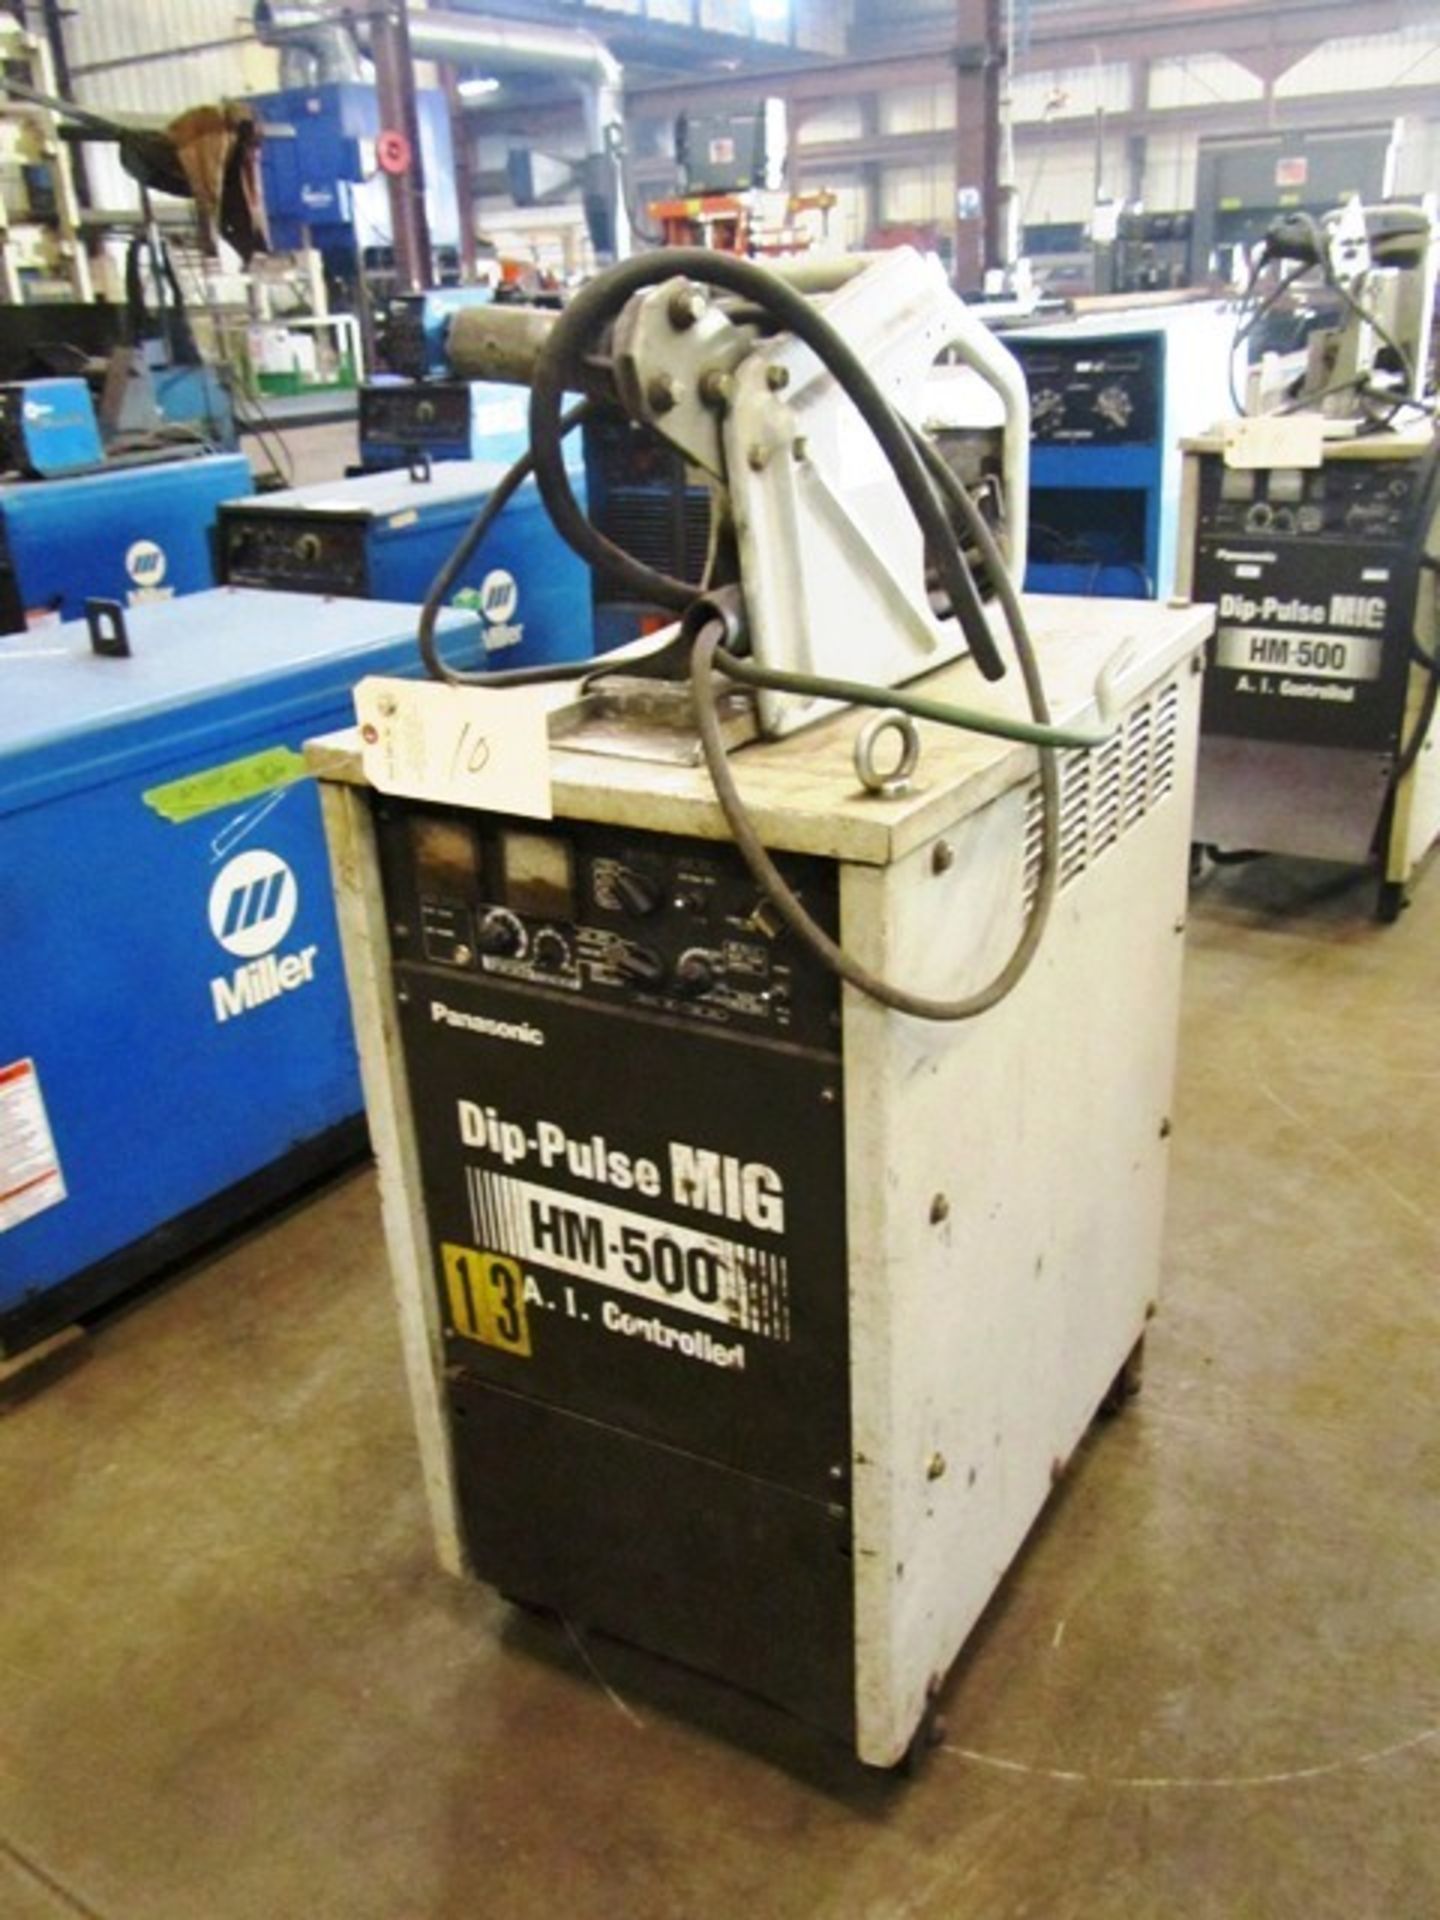 Panasonic Dip Pulse HM-500 Portable Mig Welder with Wire Feeder, sn:99-G-0961